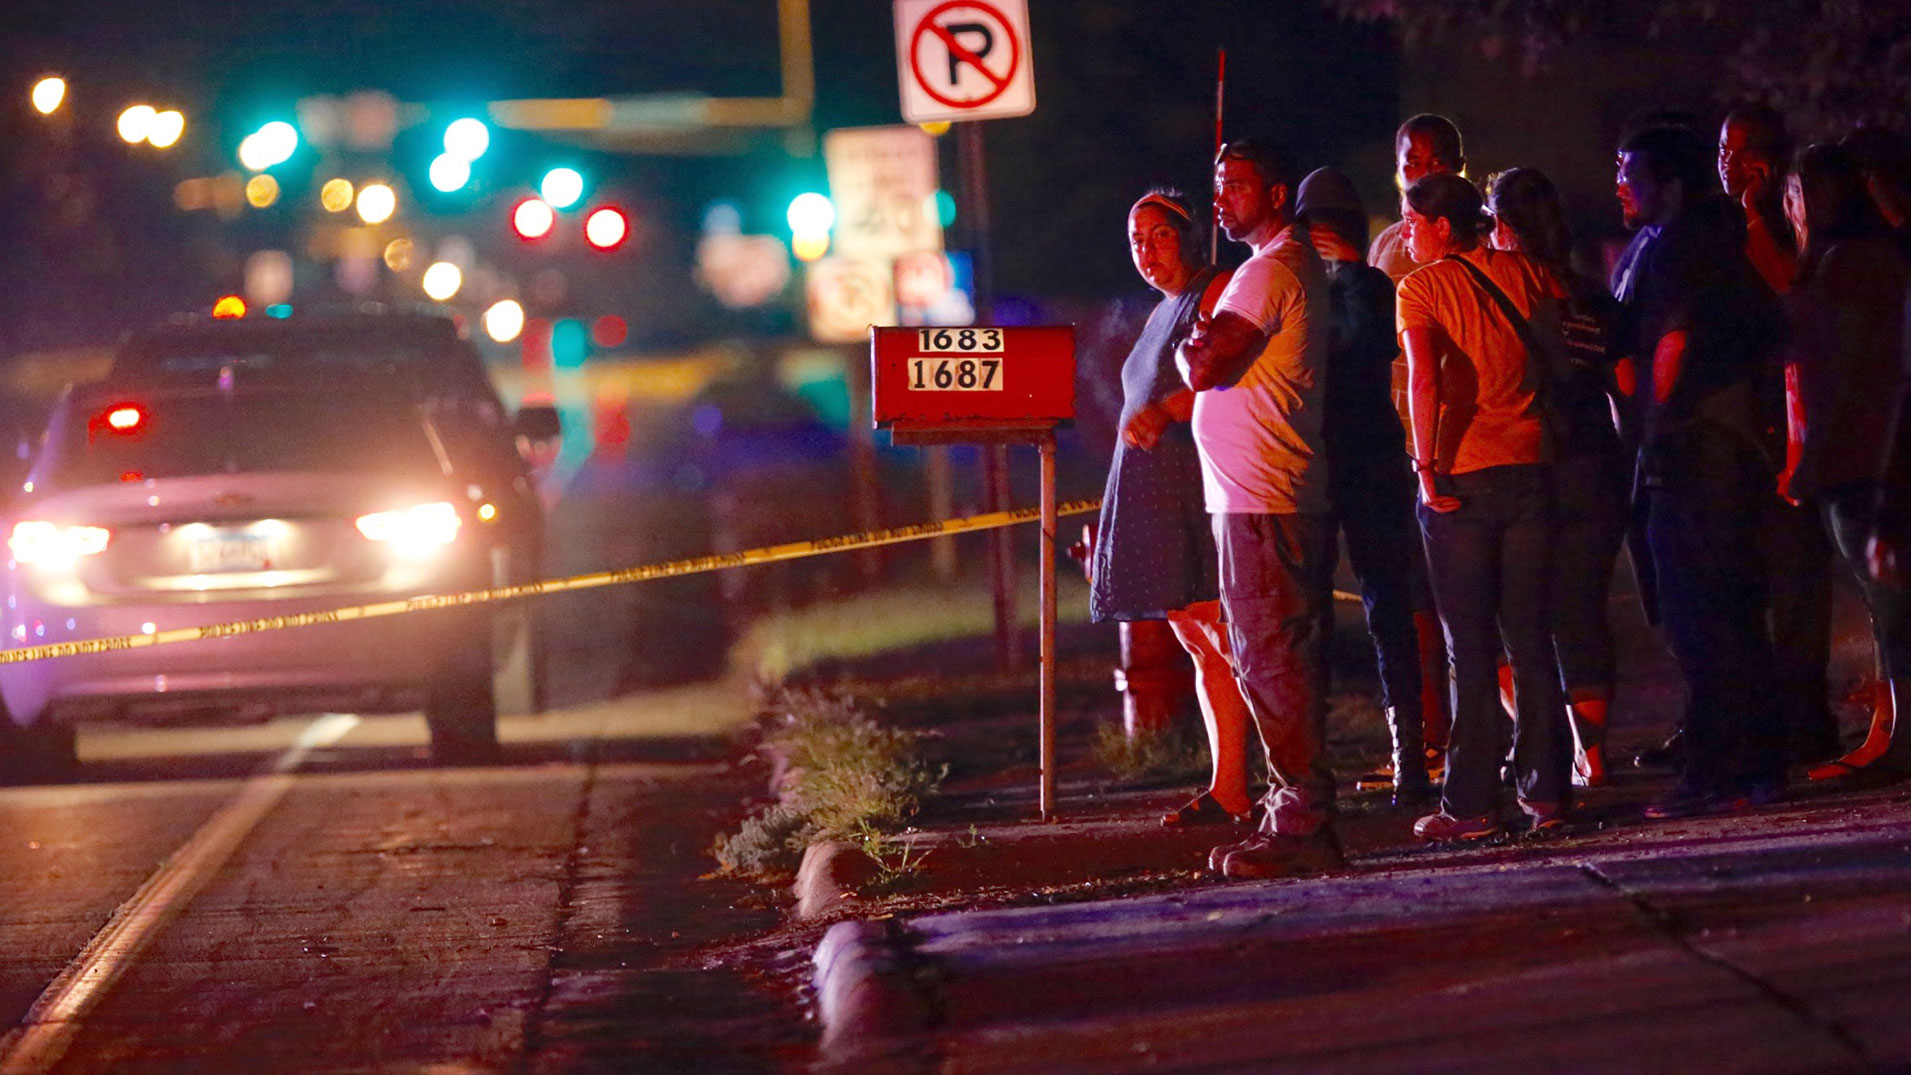 A crowd gathers at the scene of a shooting of a man involving a St. Anthony Police officer on Wednesday, July 6, 2016, in Falcon Heights, Minn. (Leila Navidi/Star Tribune via AP)